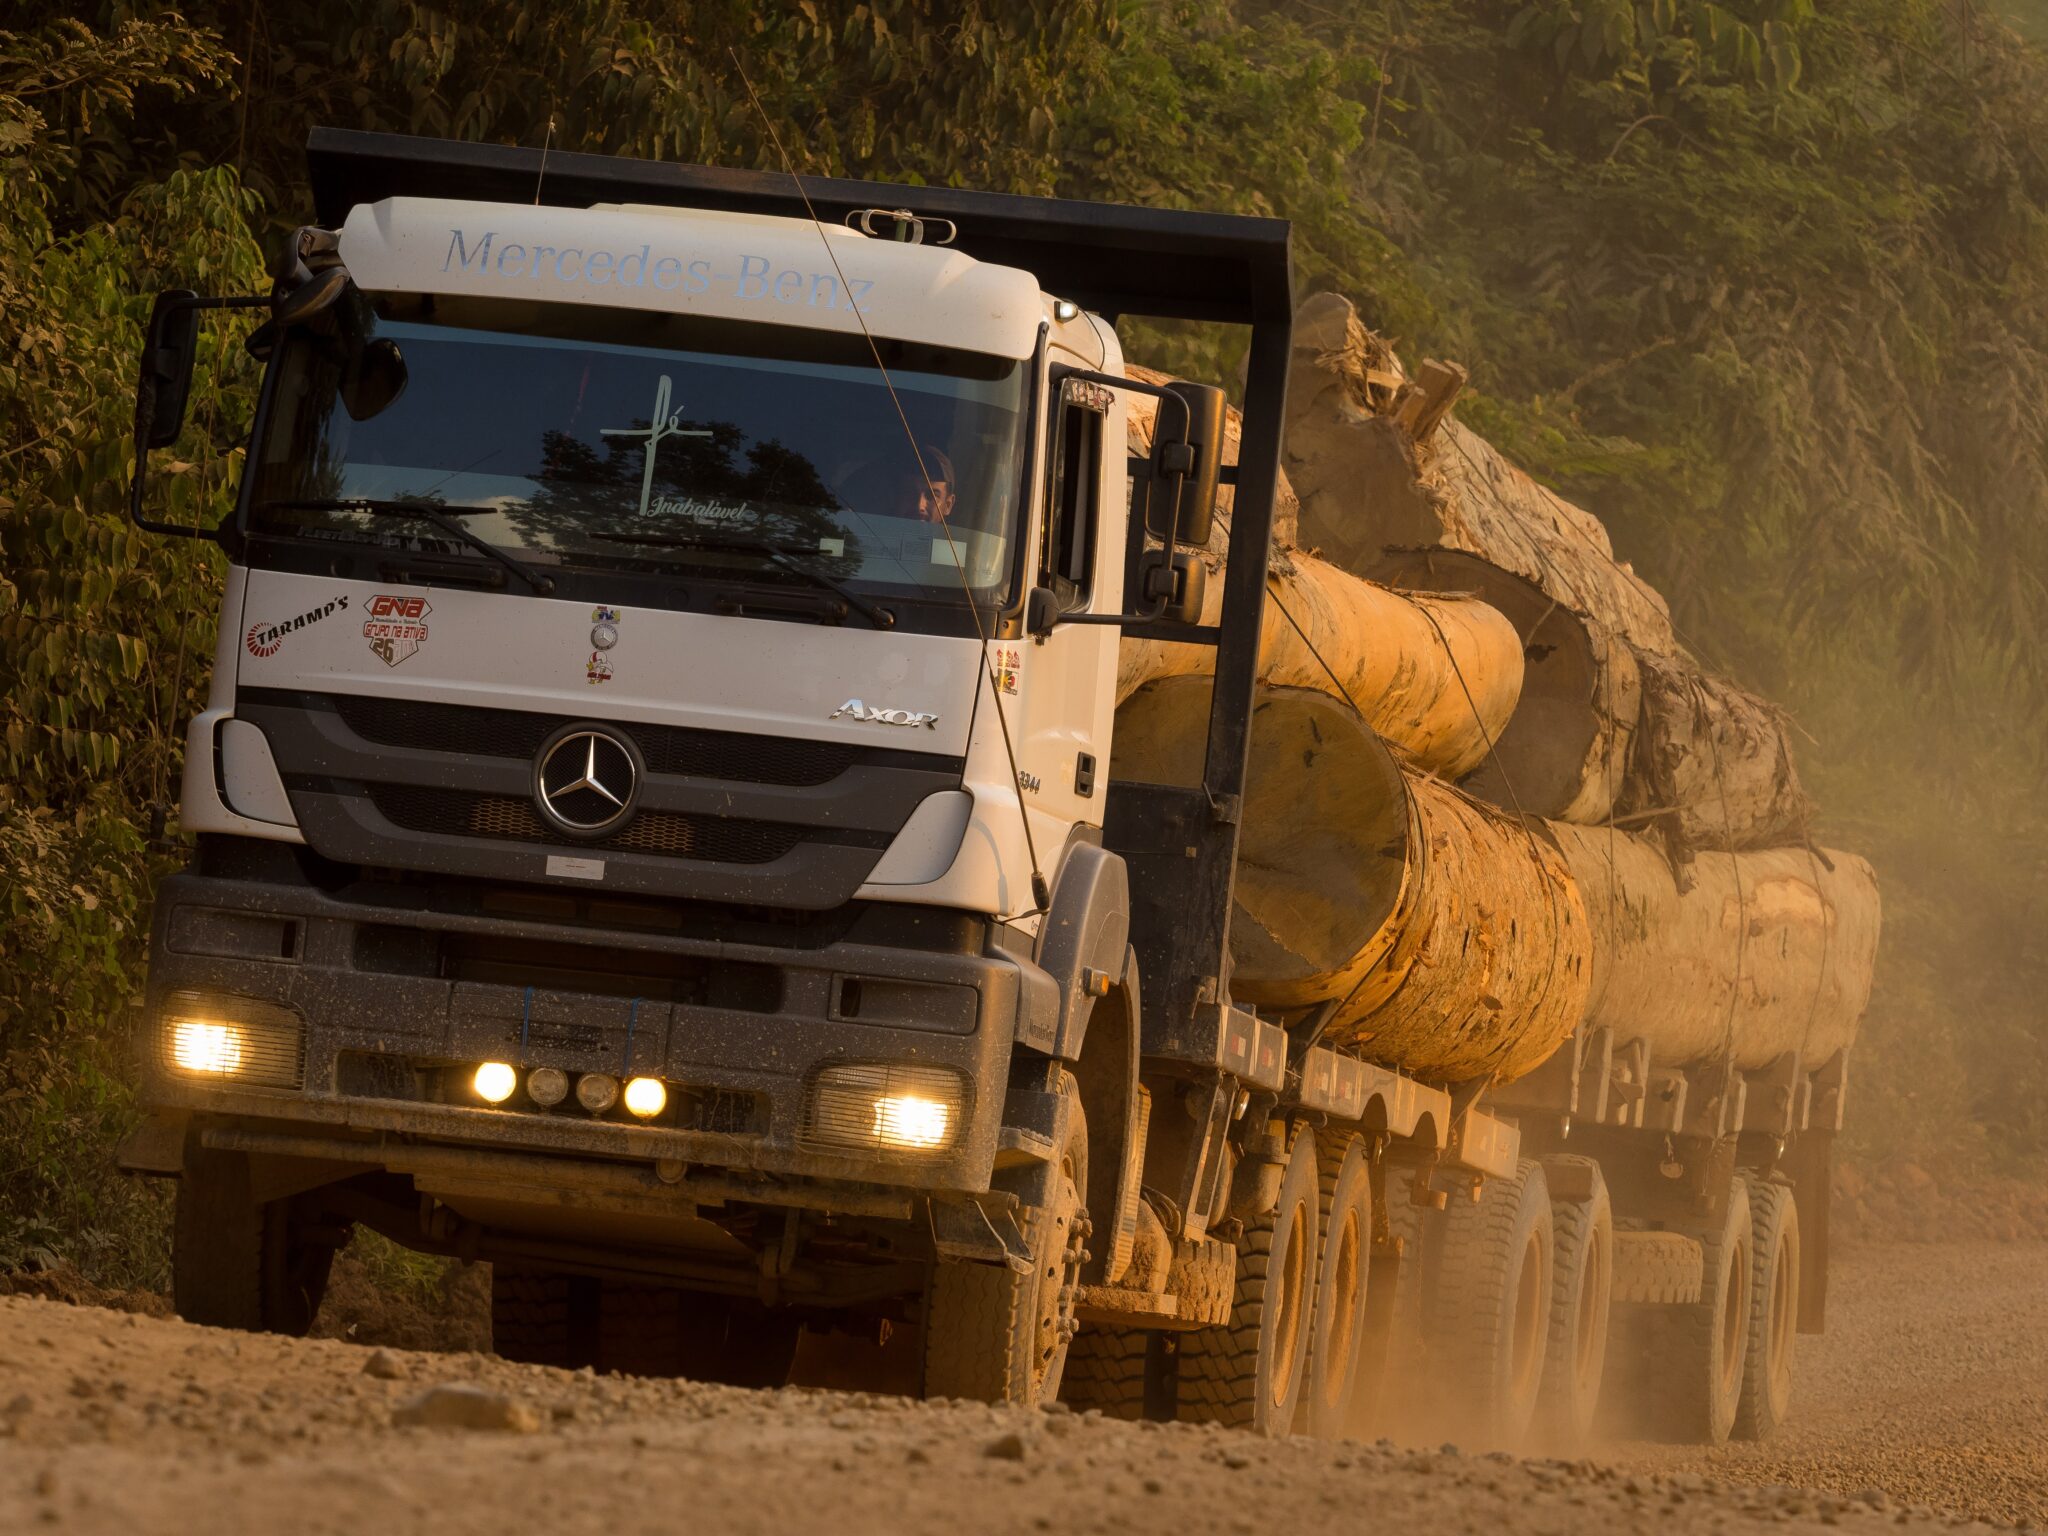 Trucks hauling cut timber in Brazil legally must have license tags visible on the ends of the logs. The driver of this truck, on the Transgarimpeira, near Itaituba, confirmed that his load of hardwoods is illegal and without the required tags. Credit: Larry C. Price